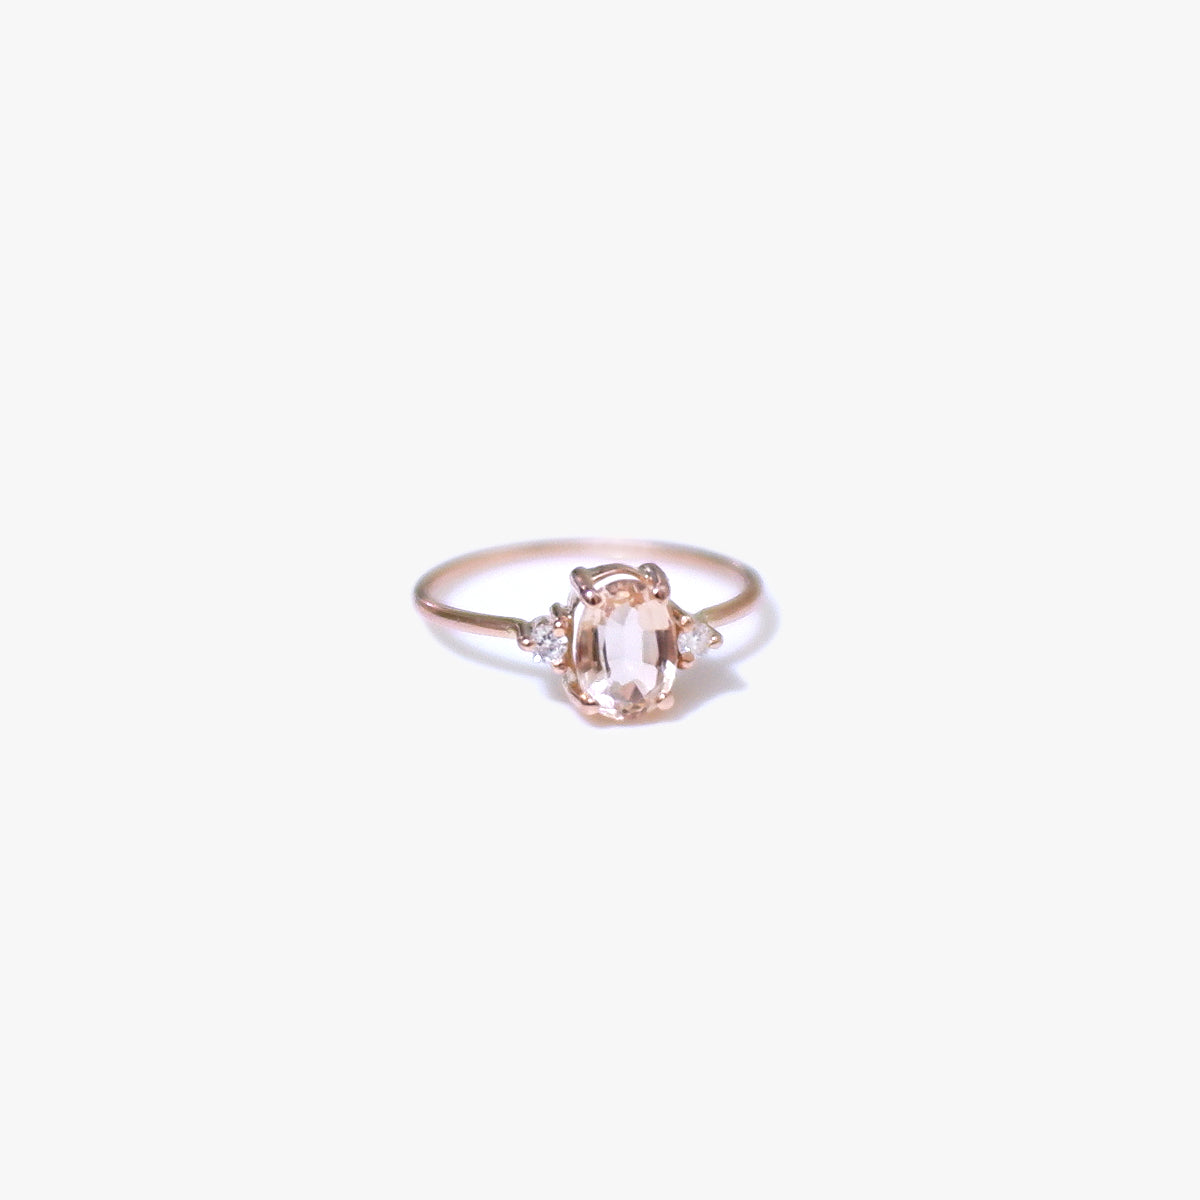 The Allure Diamond Ring in Solid Gold